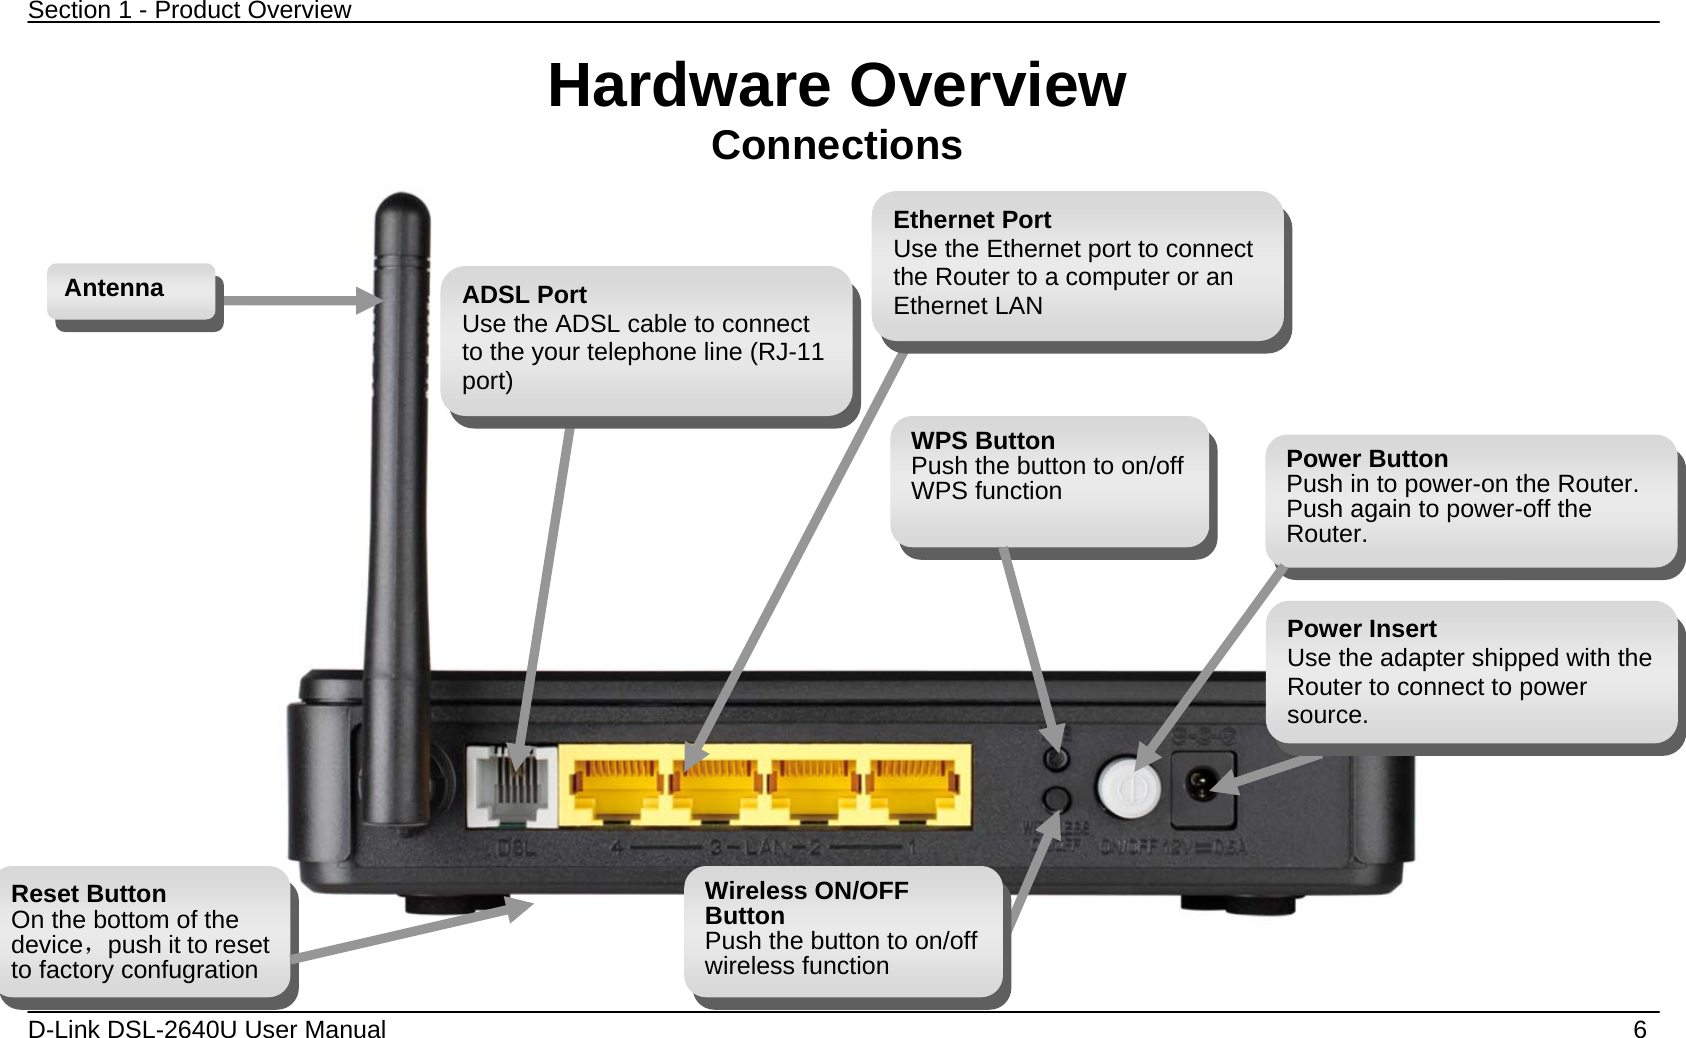 Section 1 - Product Overview  D-Link DSL-2640U User Manual    6 Hardware Overview Connections Power Insert Use the adapter shipped with the Router to connect to power source. Power ButtonPush in to power-on the Router. Push again to power-off the Router. Reset Button On the bottom of the device，push it to reset to factory confugration ADSL Port Use the ADSL cable to connect to the your telephone line (RJ-11 port) Antenna Ethernet Port Use the Ethernet port to connect the Router to a computer or an Ethernet LAN Wireless ON/OFFButton Push the button to on/off wireless function WPS ButtonPush the button to on/off WPS function 